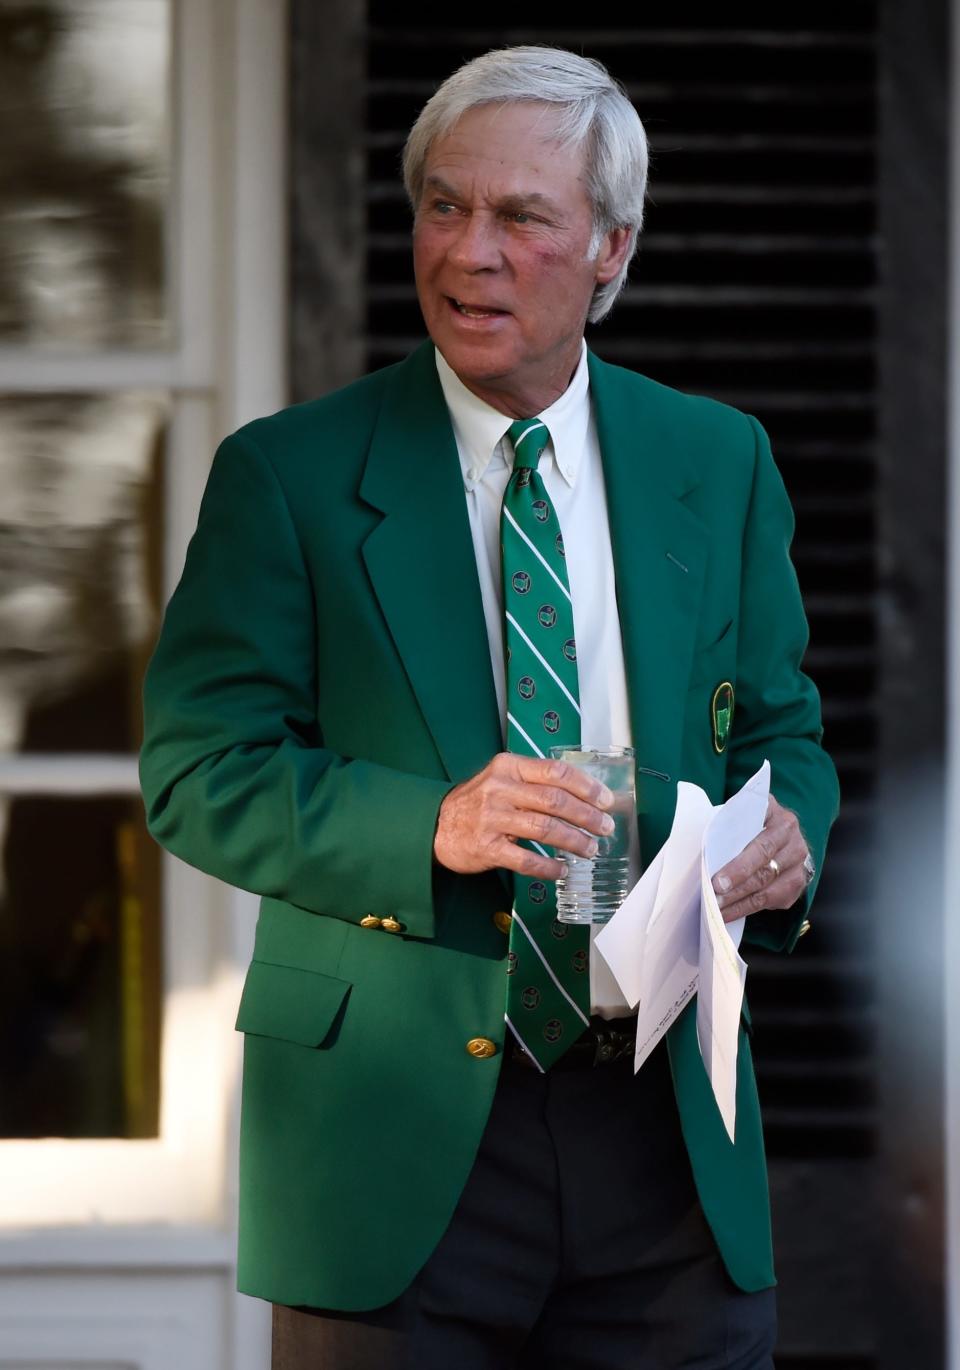 Ben Crenshaw arrives for the Champions Dinner during the second practice round at Augusta National Golf Club, Tuesday, April 5, 2016, in Augusta, Georgia. SARA CORCE/STAFF